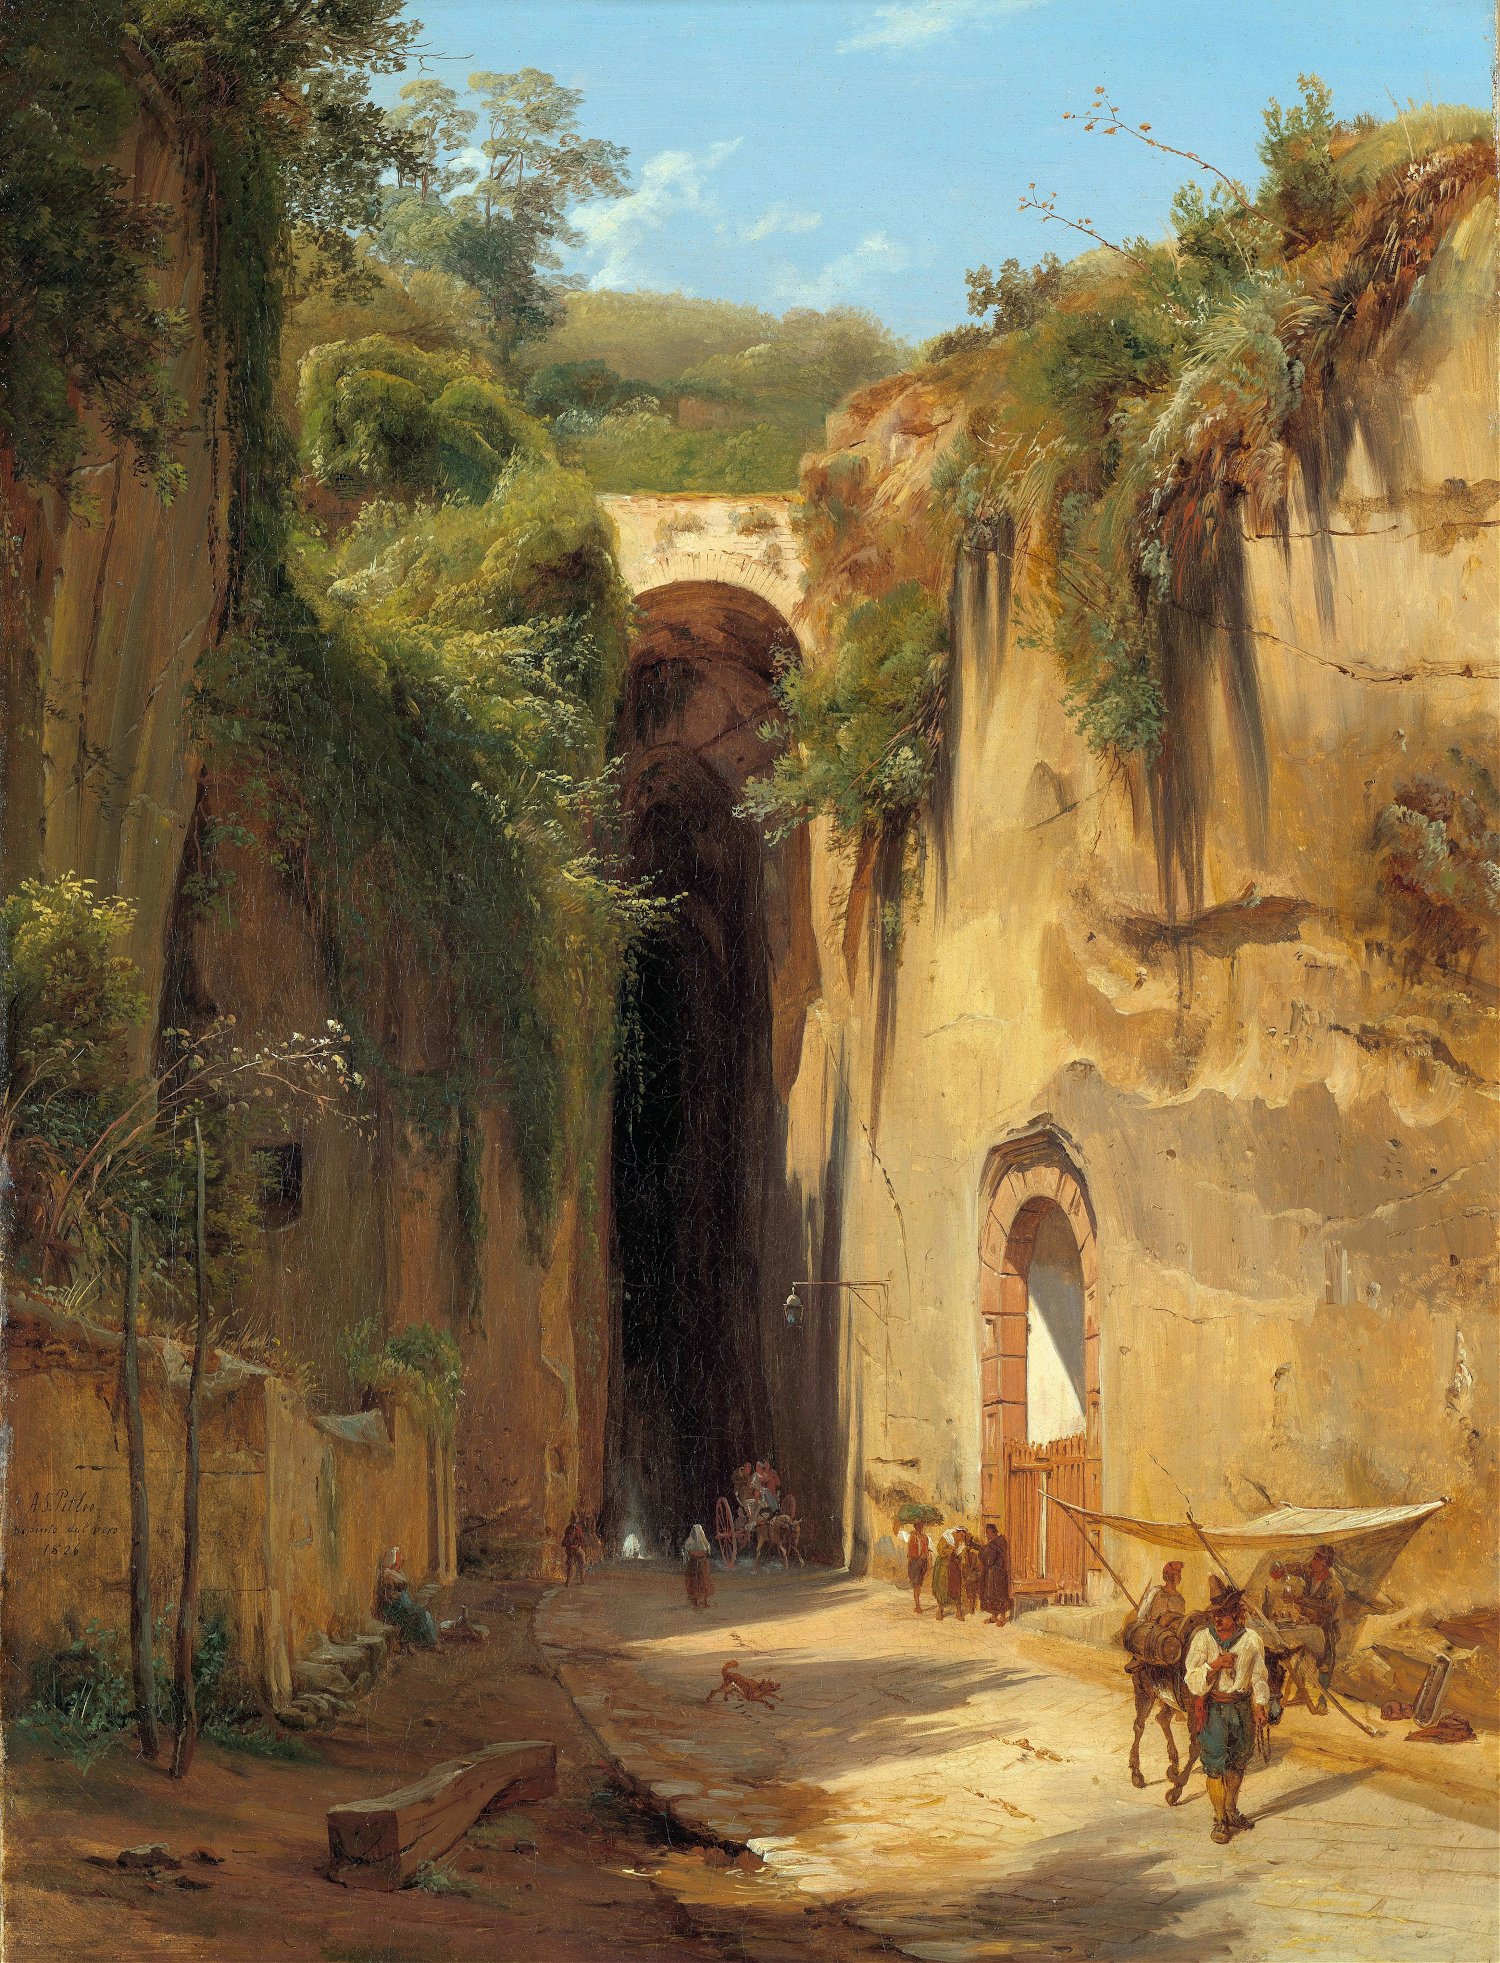 The Grotto of Posillipo at Naples (1826)